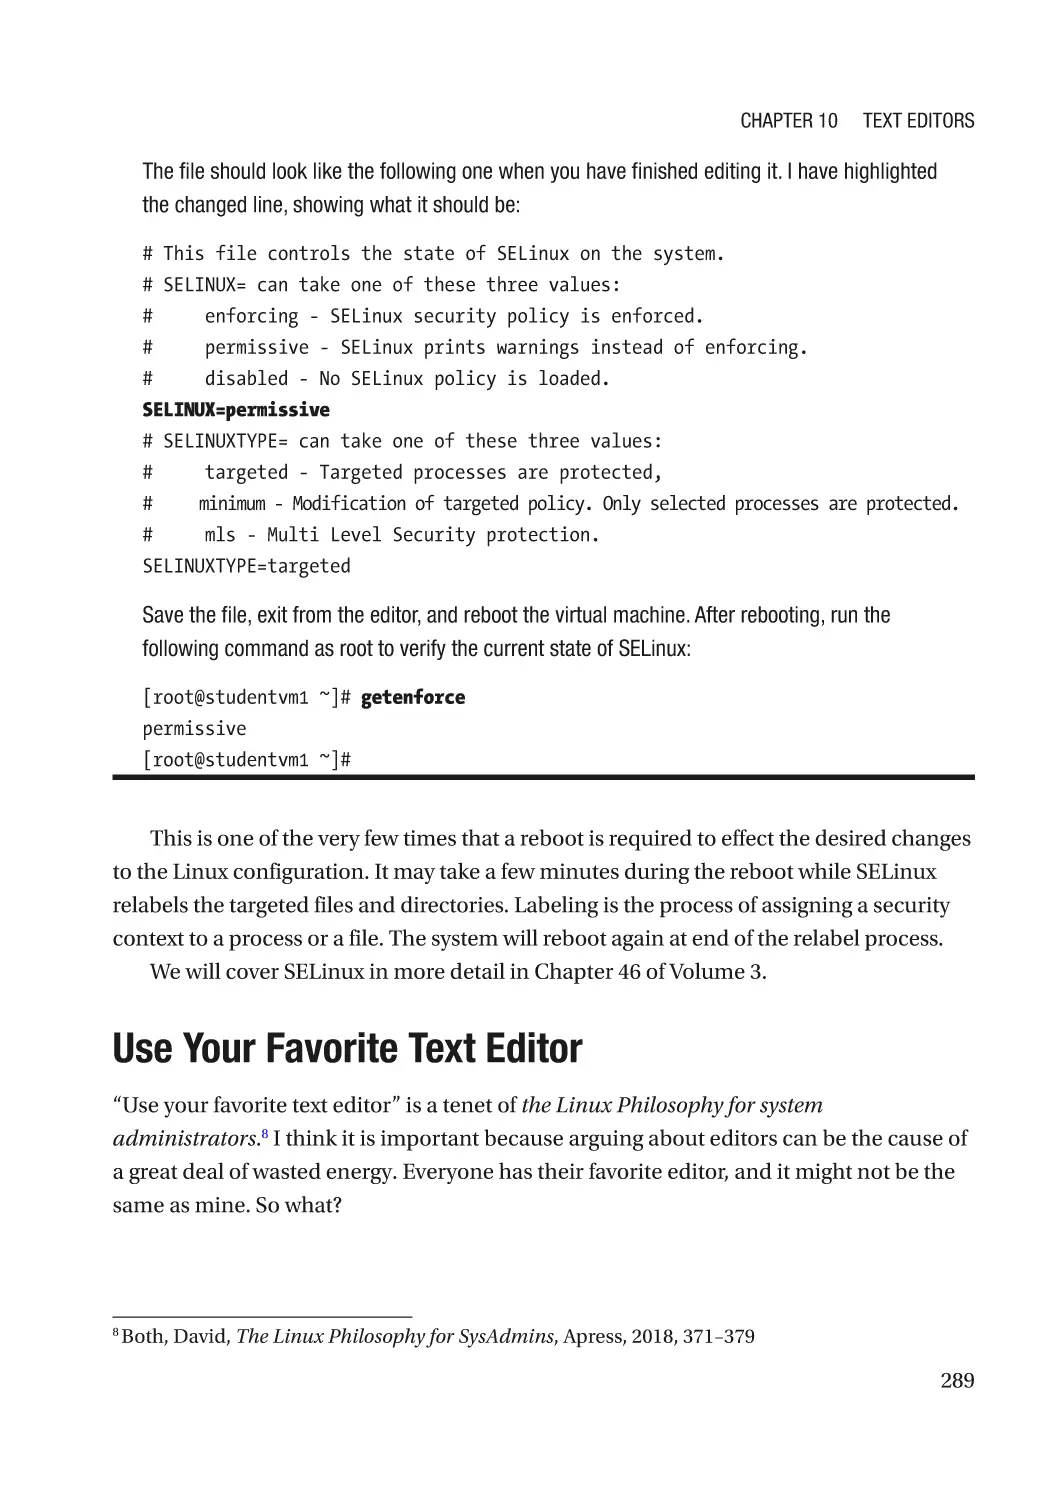 Use Your Favorite Text Editor